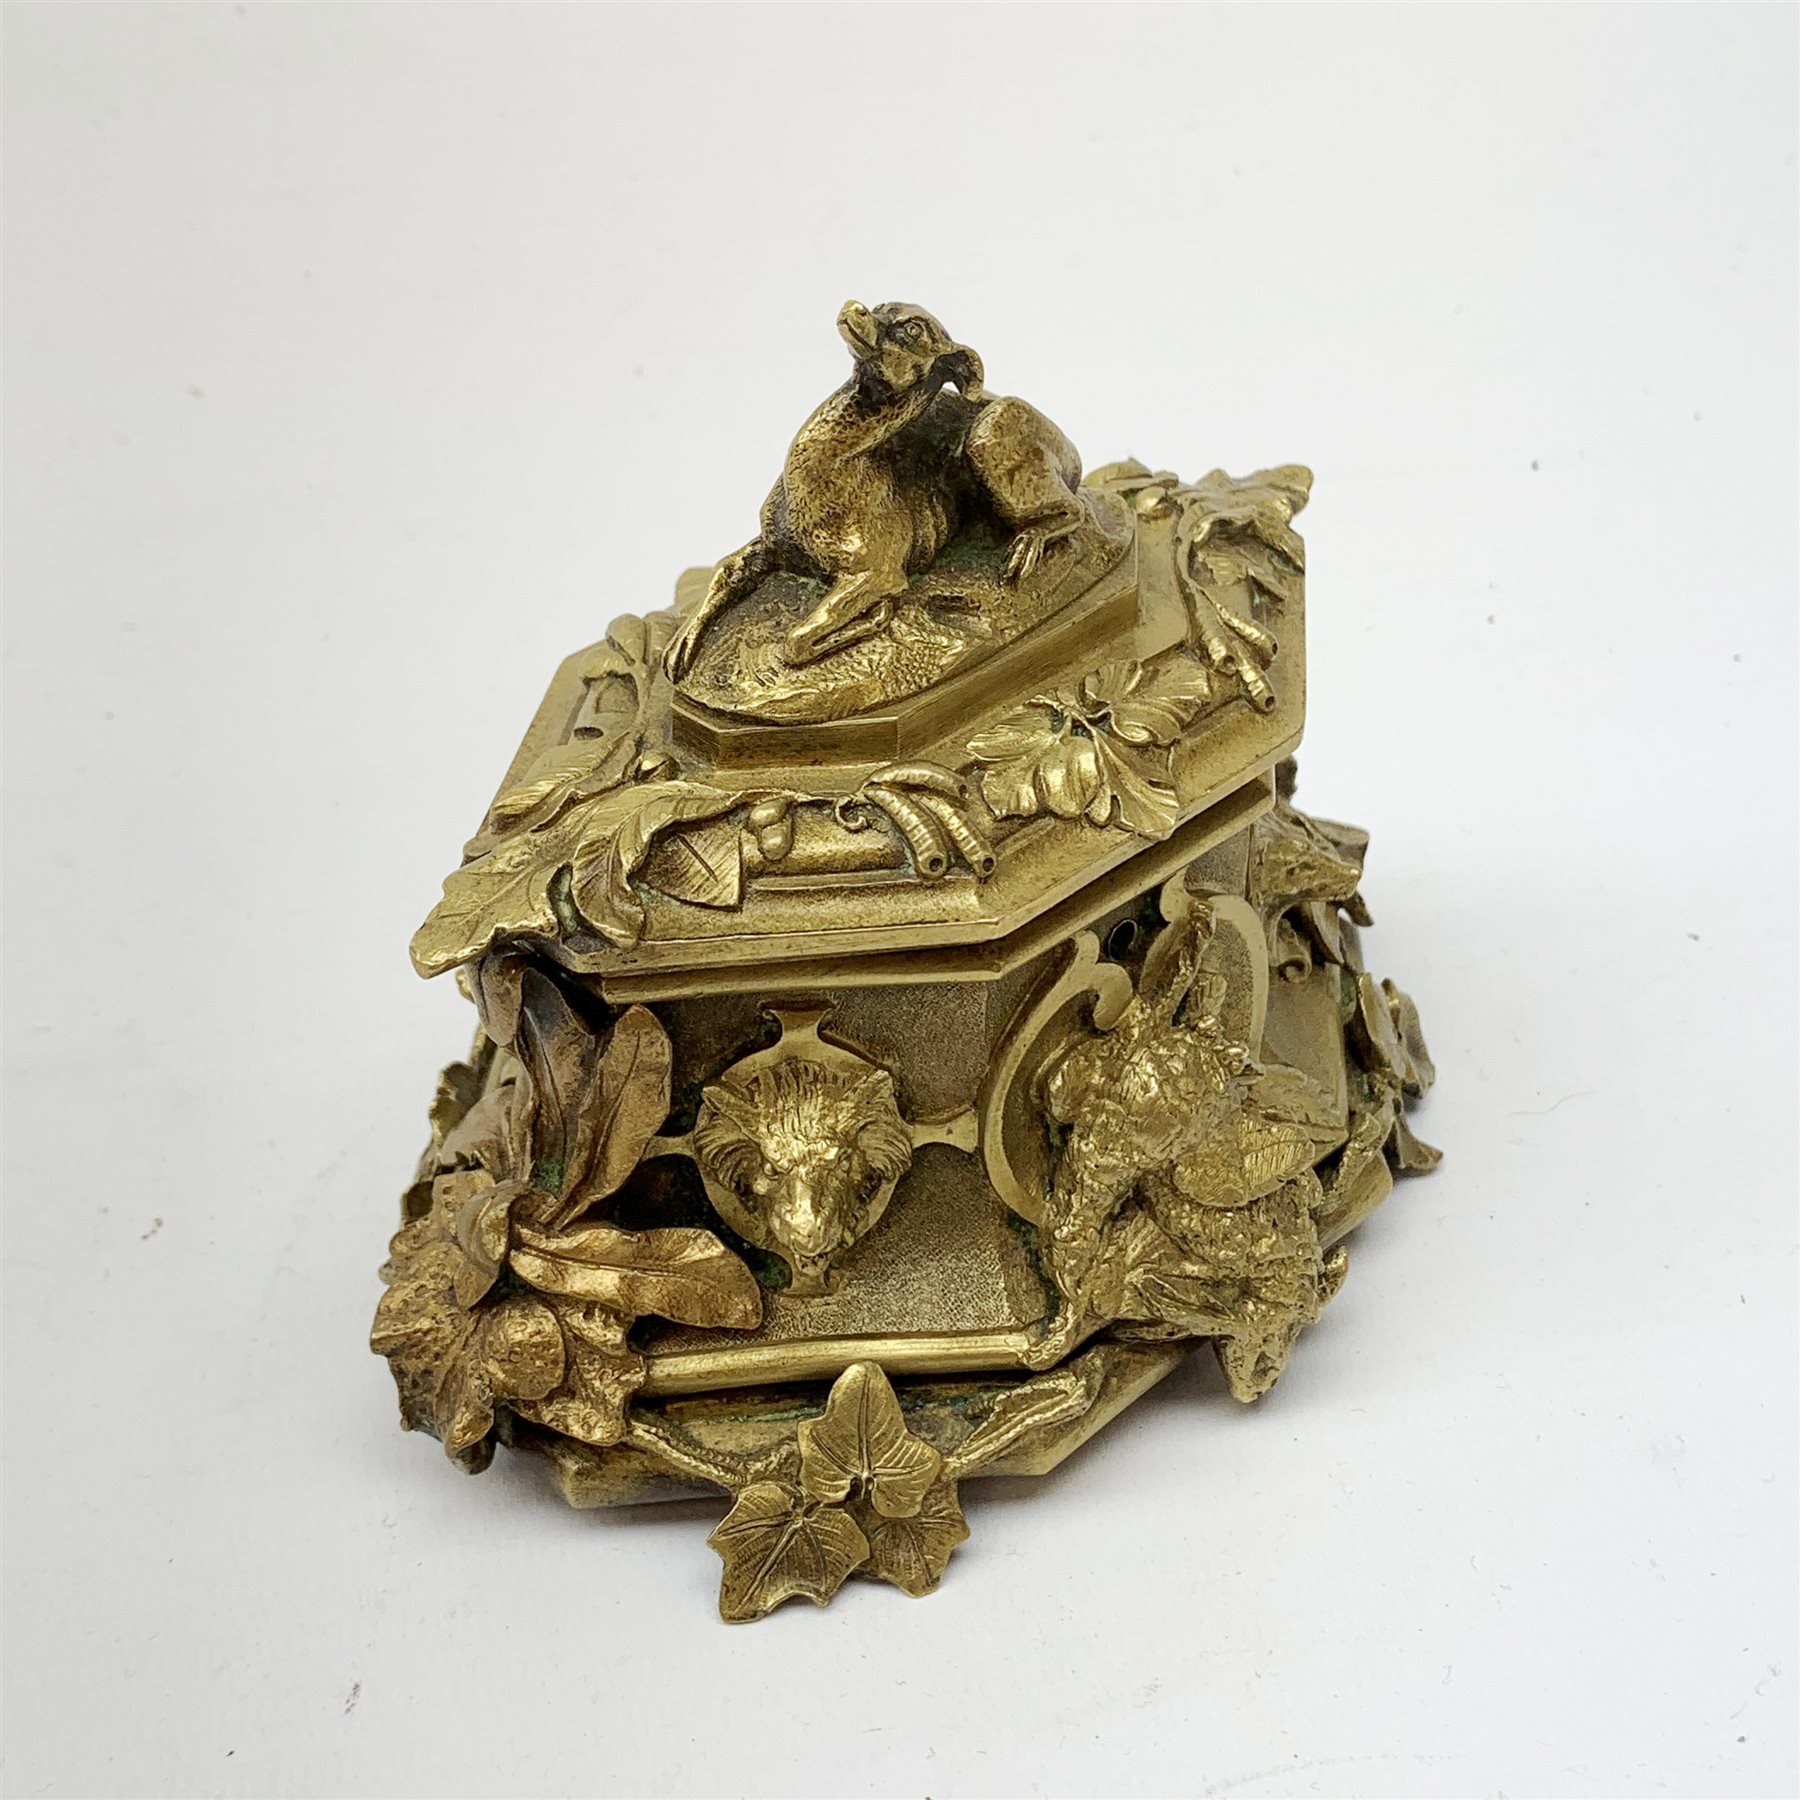 Late 19th century gilt bronze casket, of lozenge form with cast and applied detail in the form of ho - Image 3 of 9